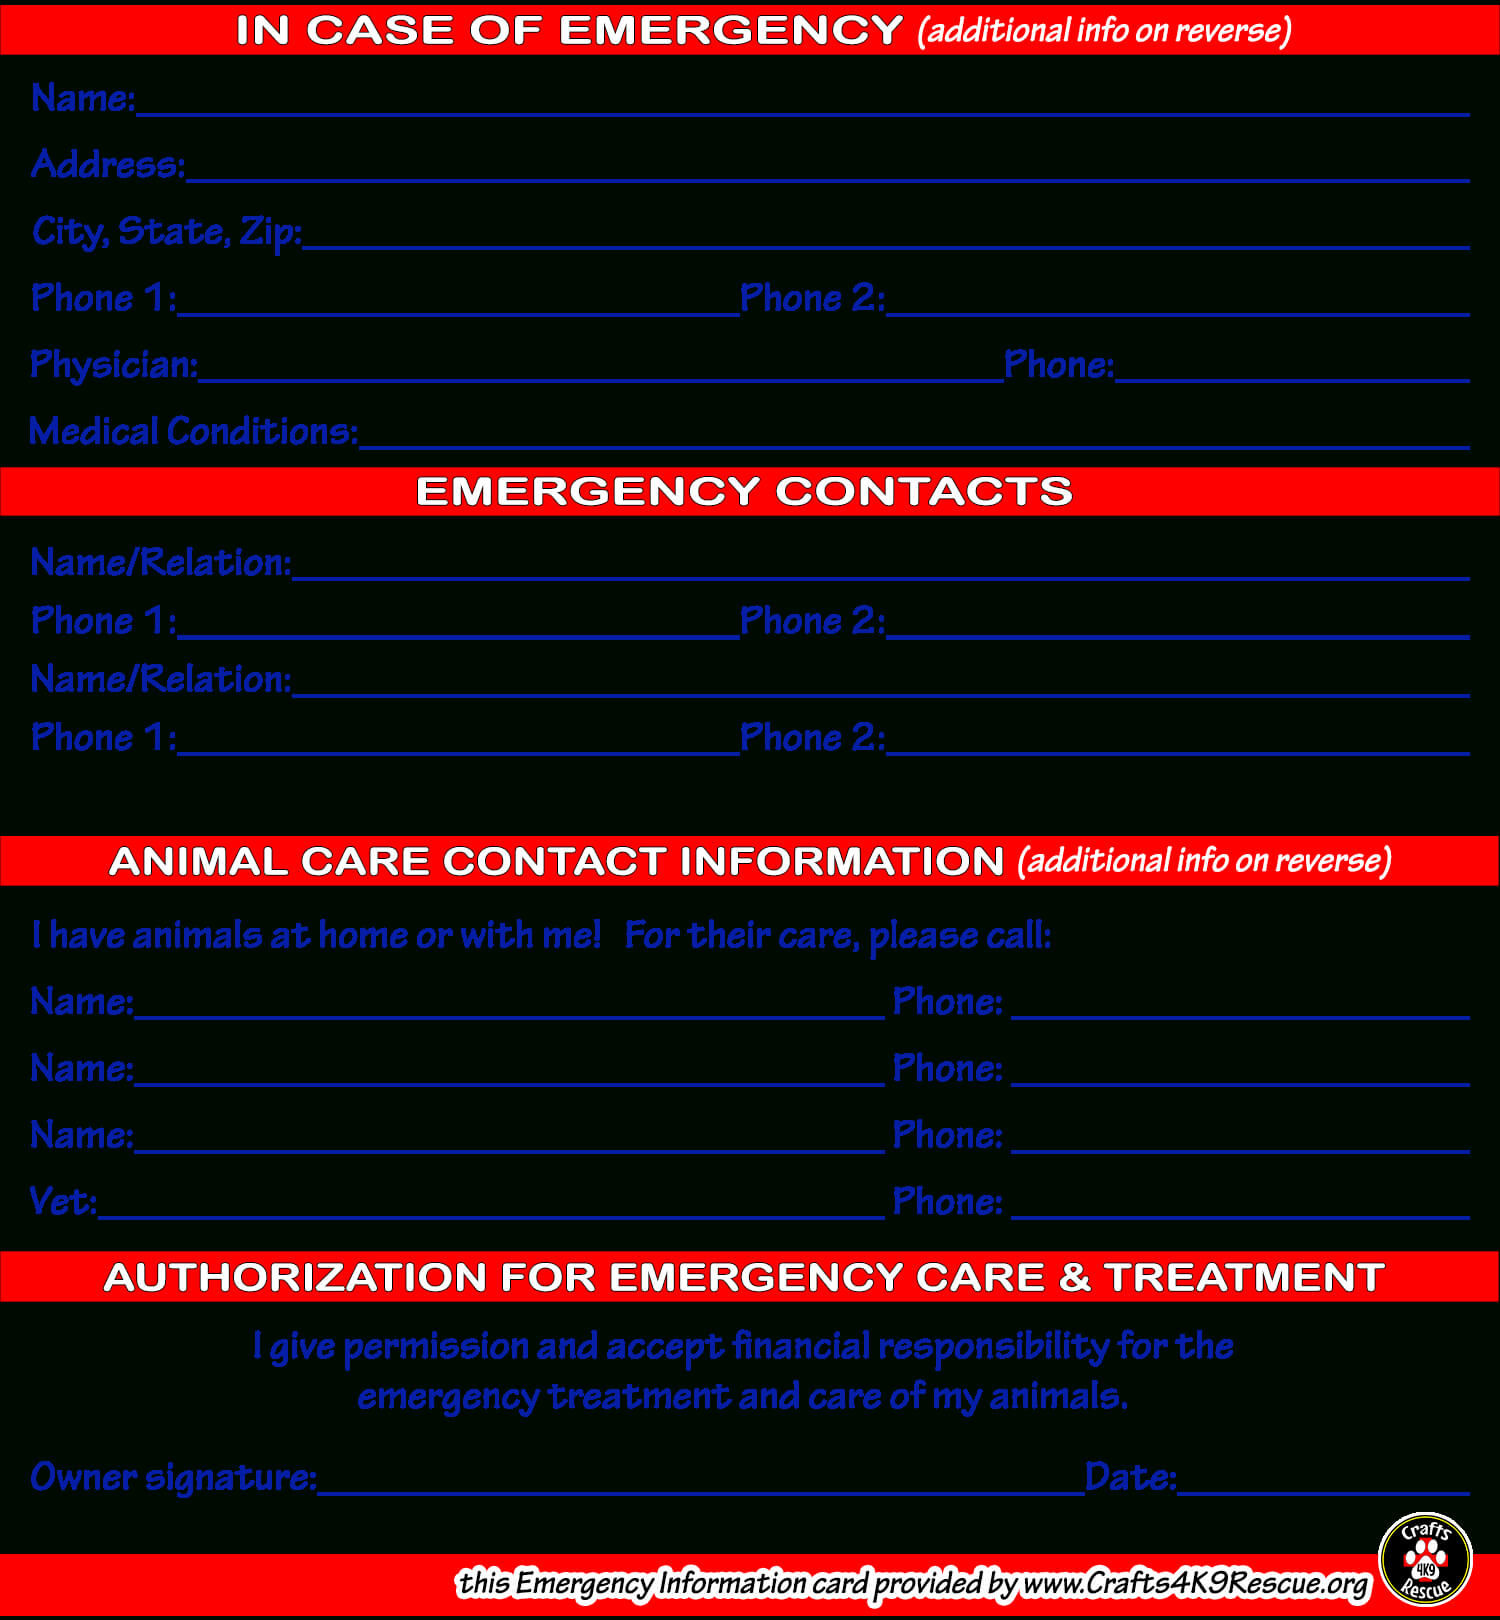 Emergency Information Card Template | Crafts4K9Rescue Regarding In Case Of Emergency Card Template